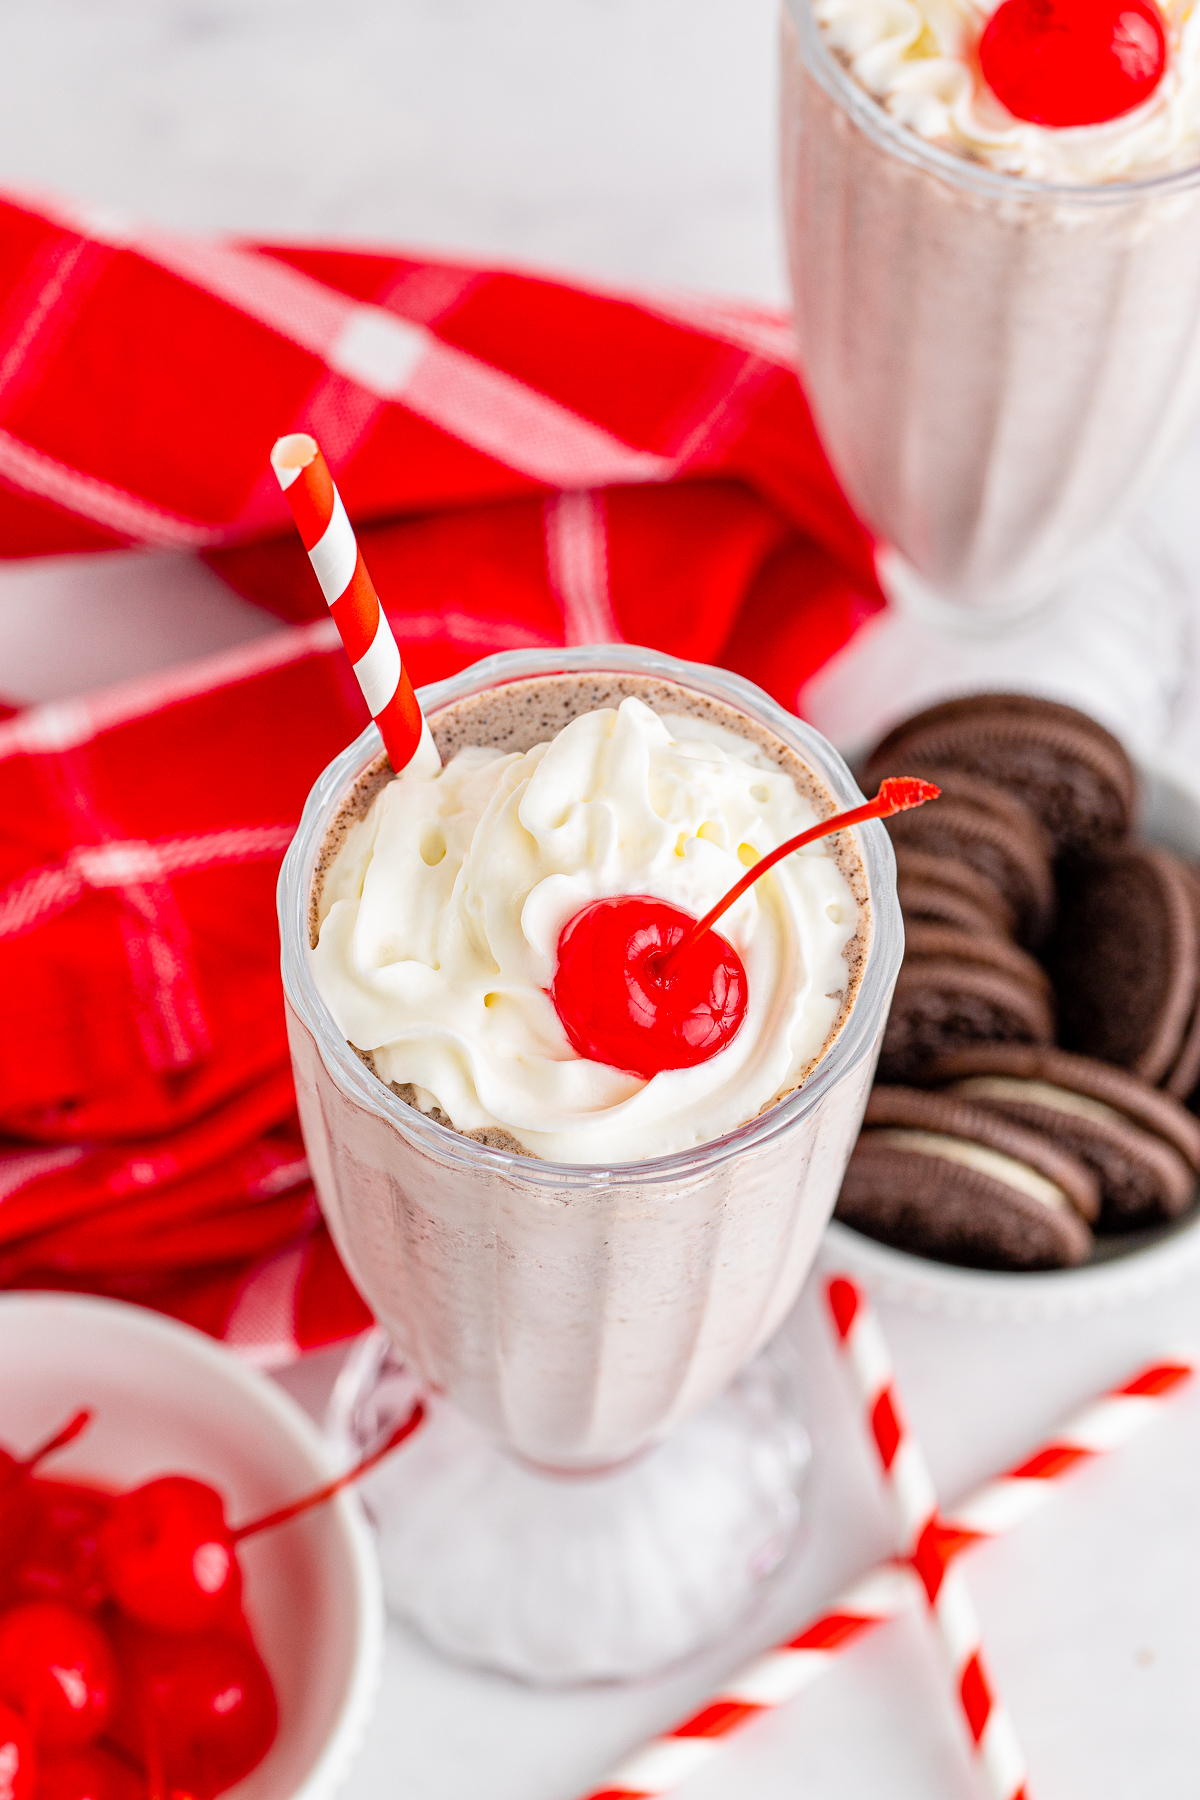 Cookies and Cream Milkshake top with whipped cream and cherry